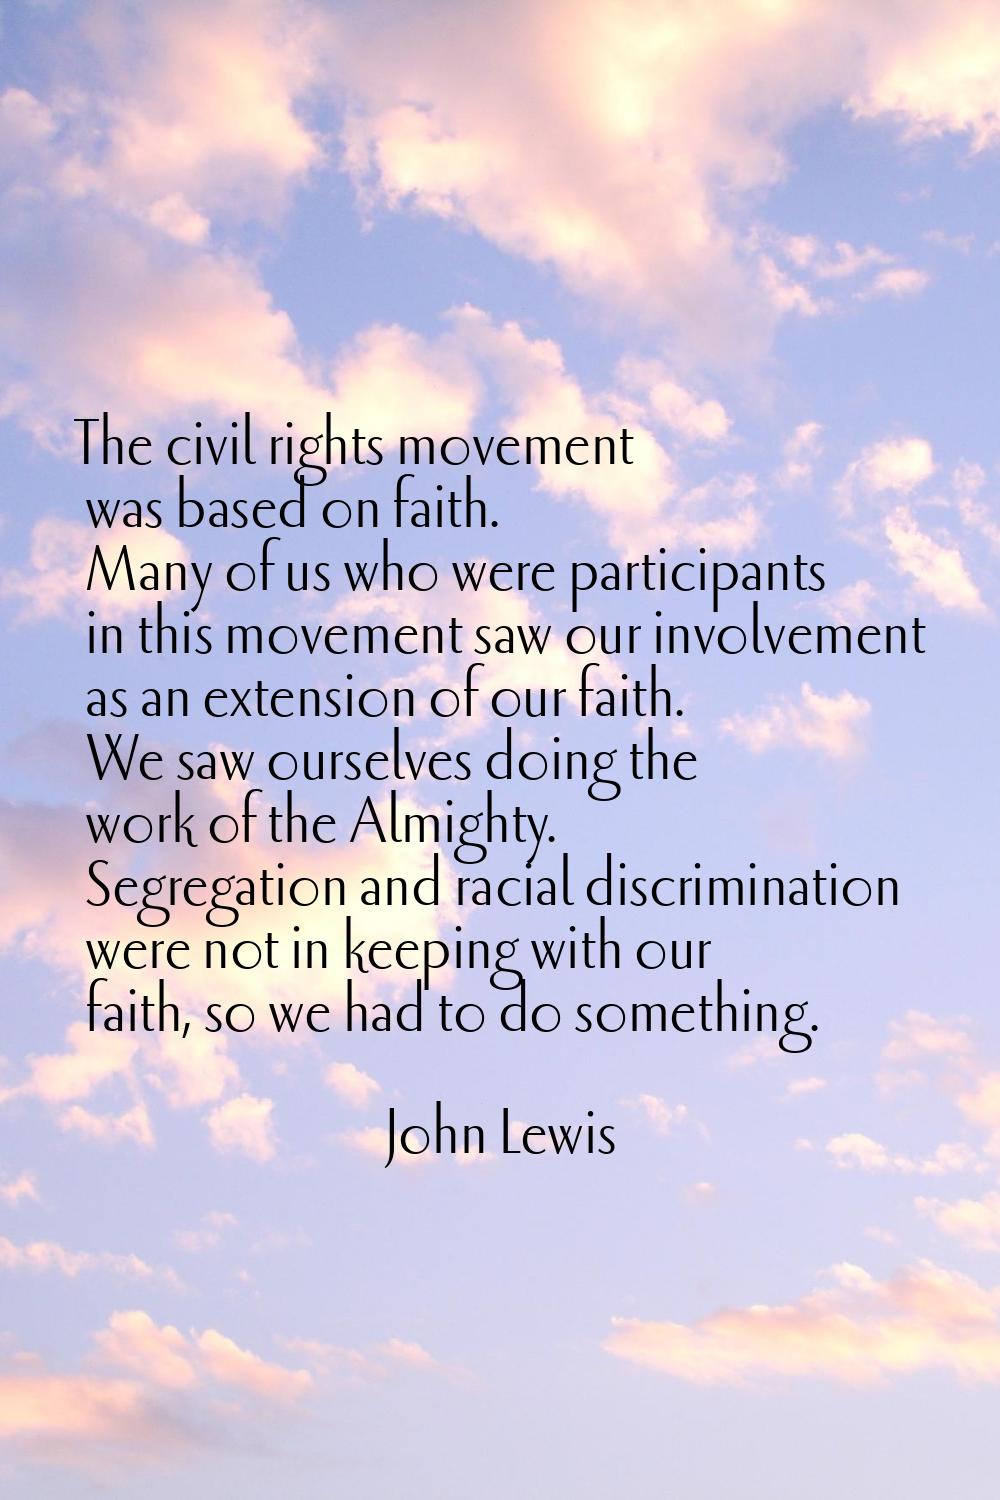 The civil rights movement was based on faith. Many of us who were participants in this movement saw